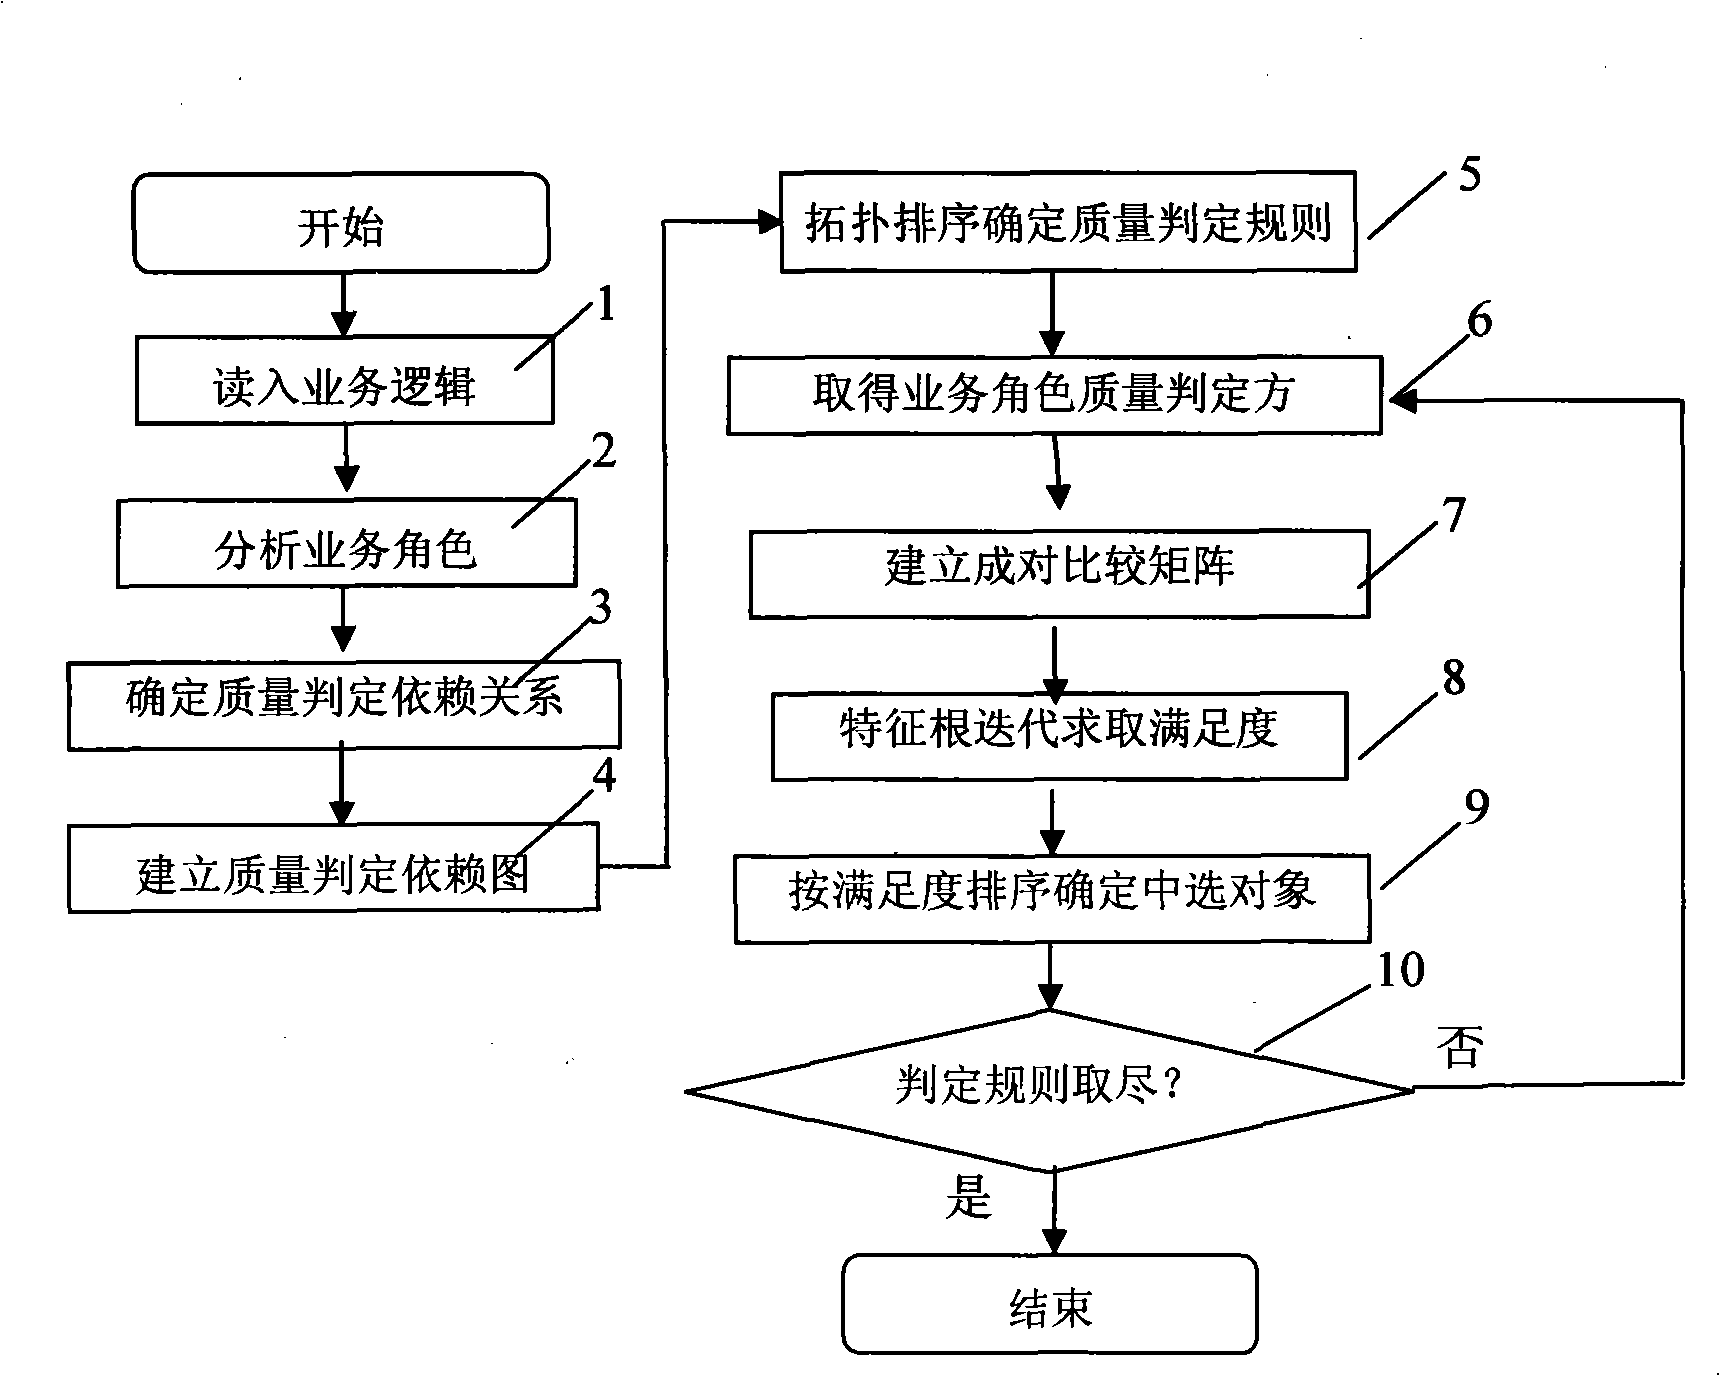 Method for choosing service based on quality dependency relationship under service composite surroundings